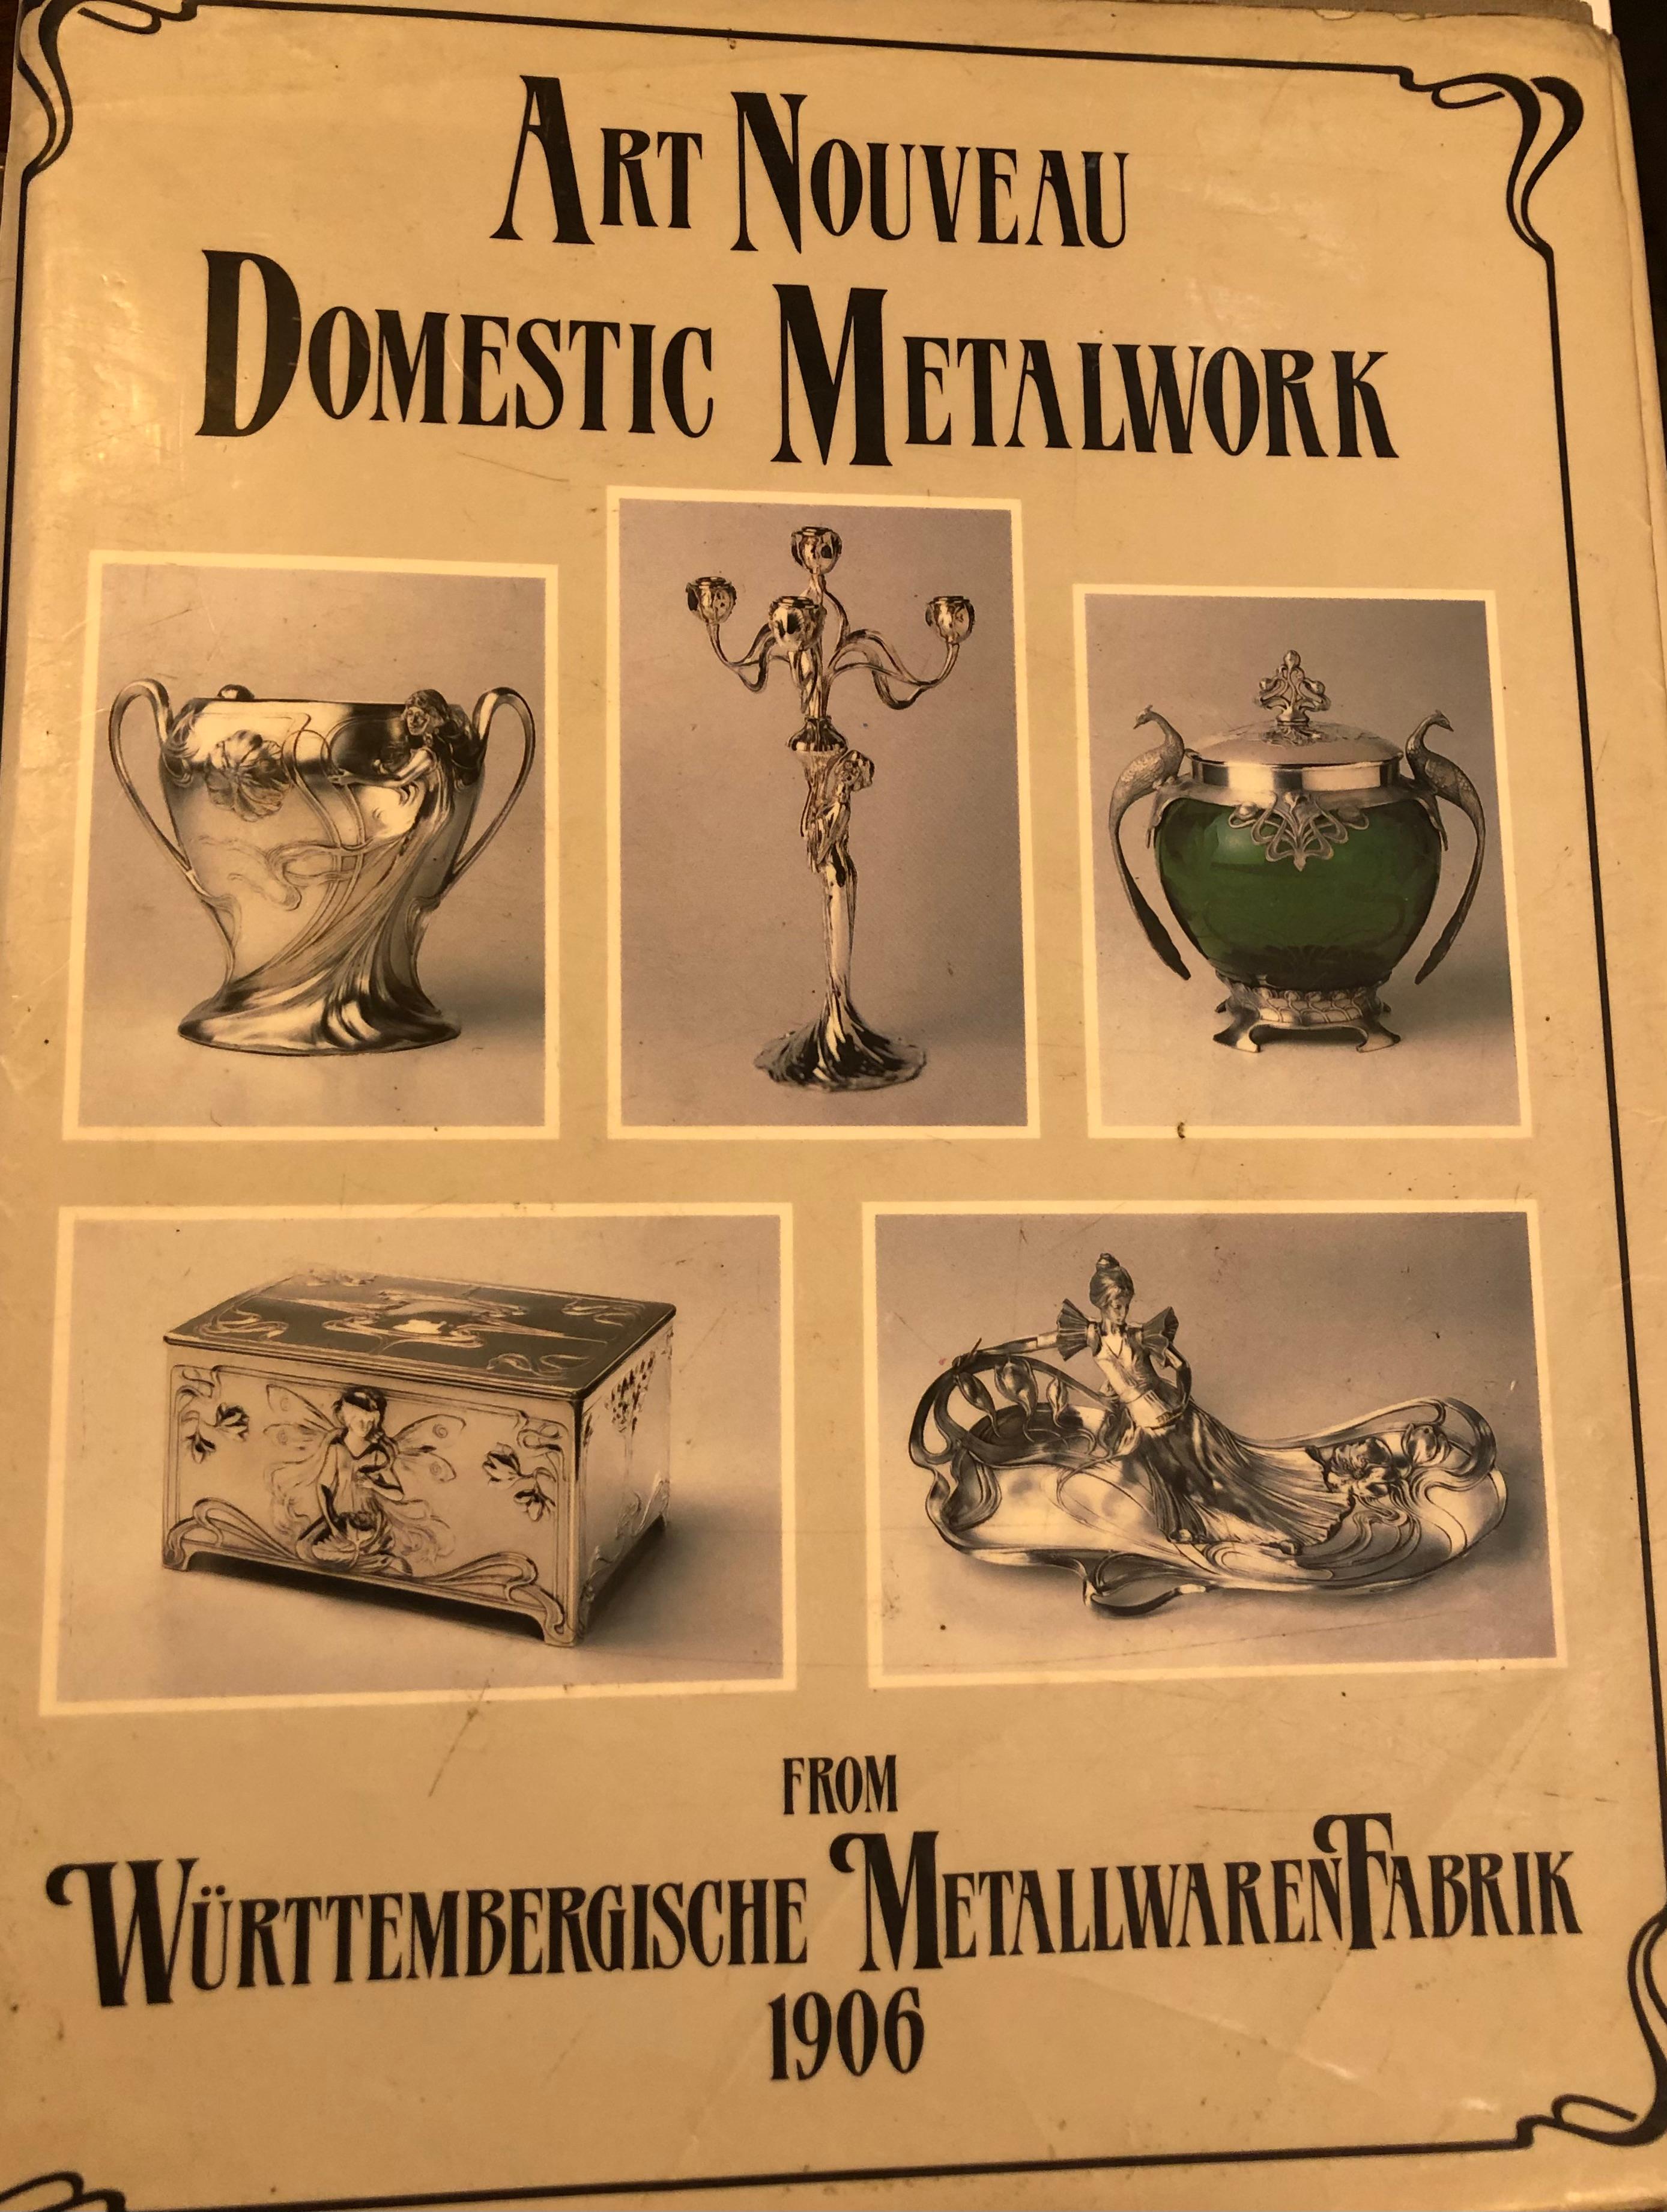 2 Pitchers WMF
Style: Jugendstil, Art Nouveau, Liberty
year: 1906
Country: Germany
Materials: silver plated and glass 
Several of the WMF objects can be seen in museums
Stamps
Page 134 = of the book Art Nouveau Metalwork from Wurttembergische